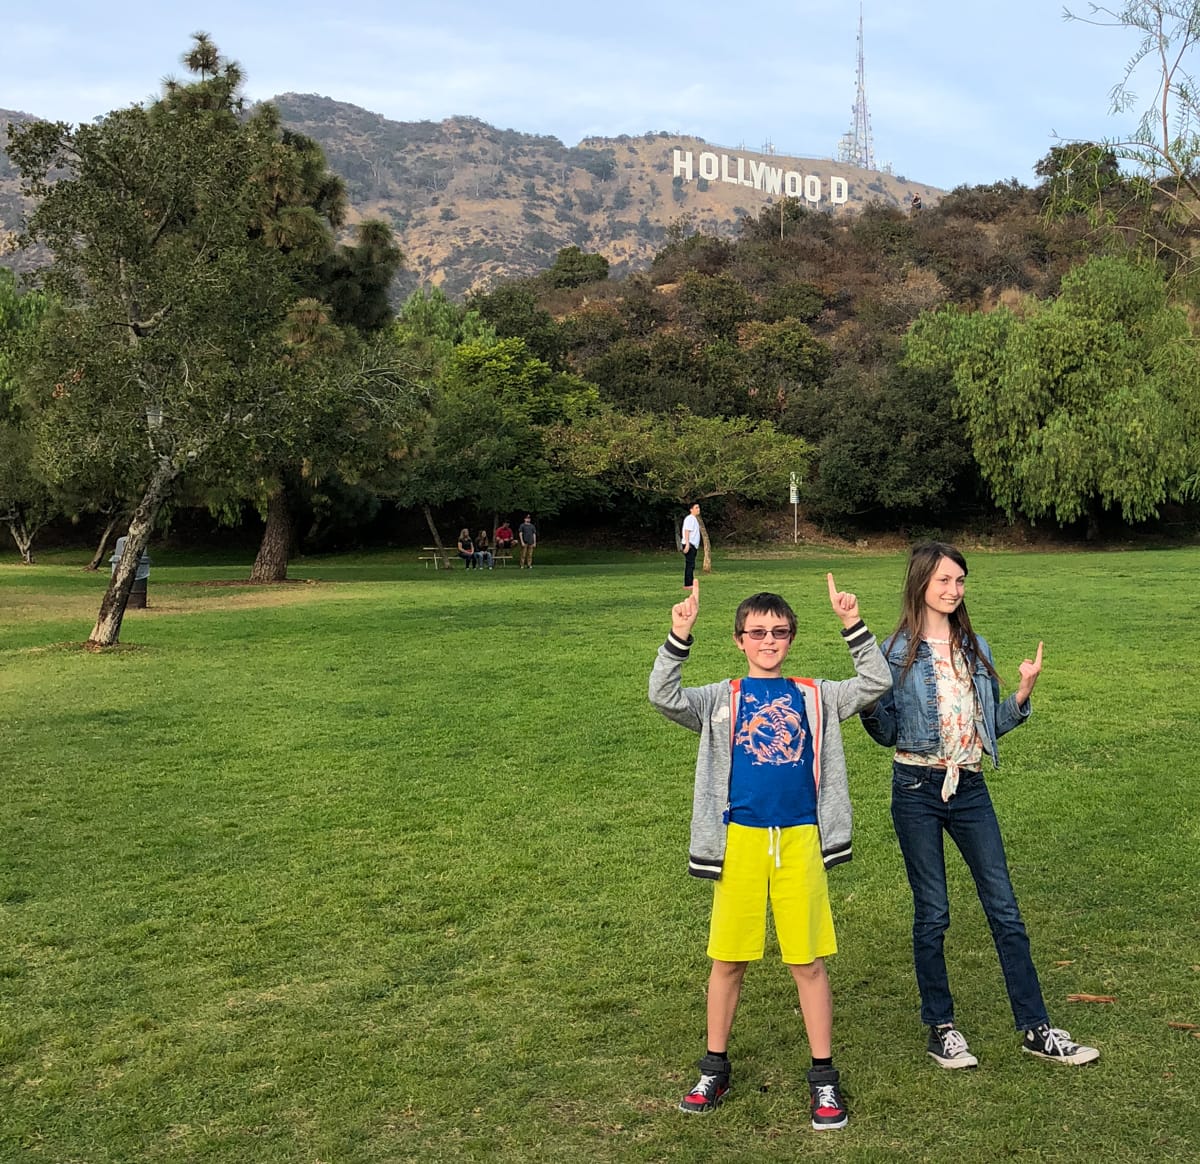 My kids posing with the Hollywood Sign in Griffith Park